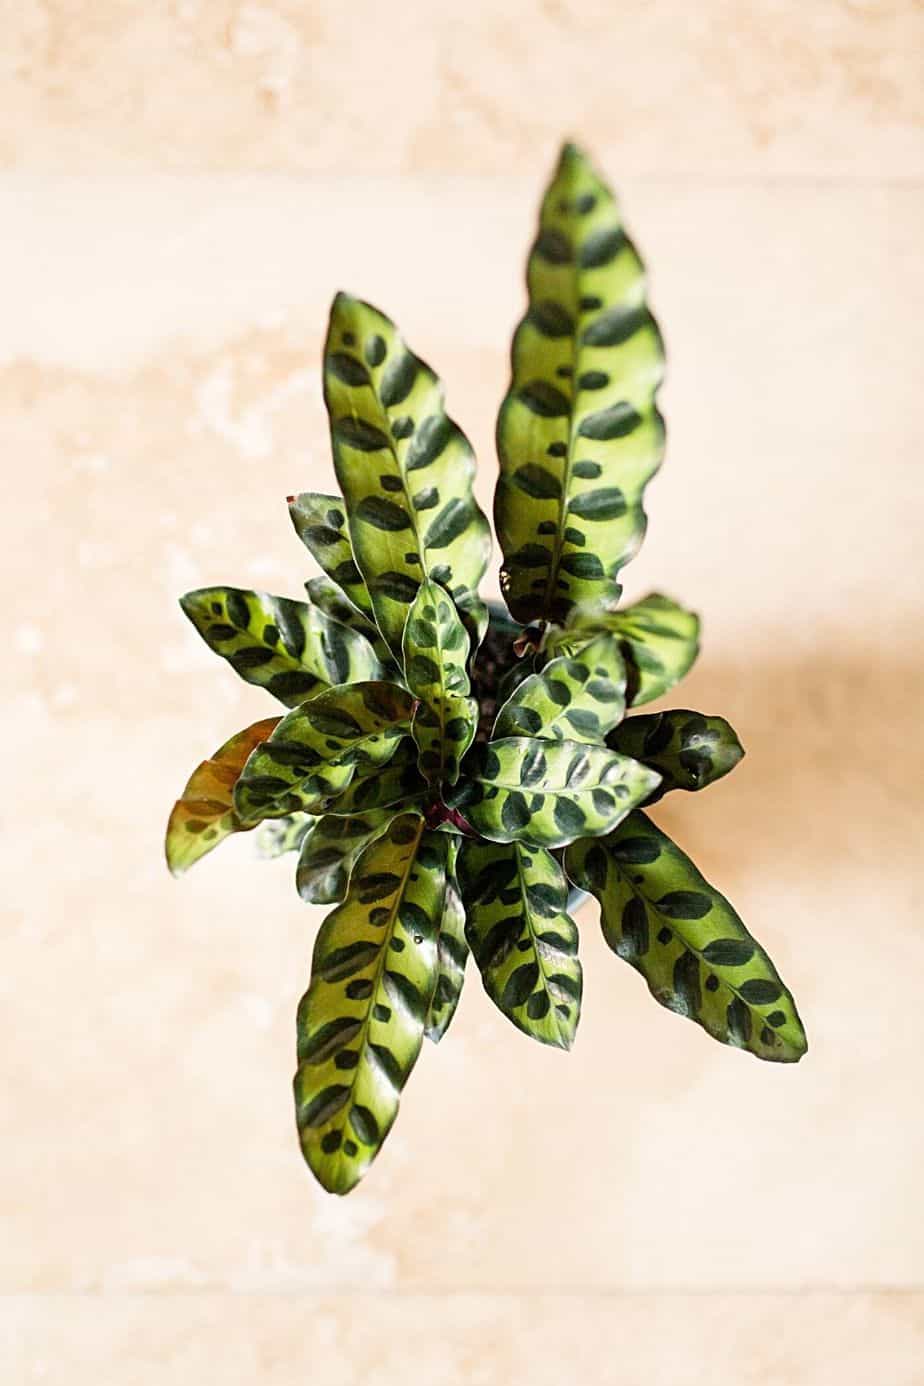 Rattlesnake Plant is a low-light plant that you can place by your northwest-facing window